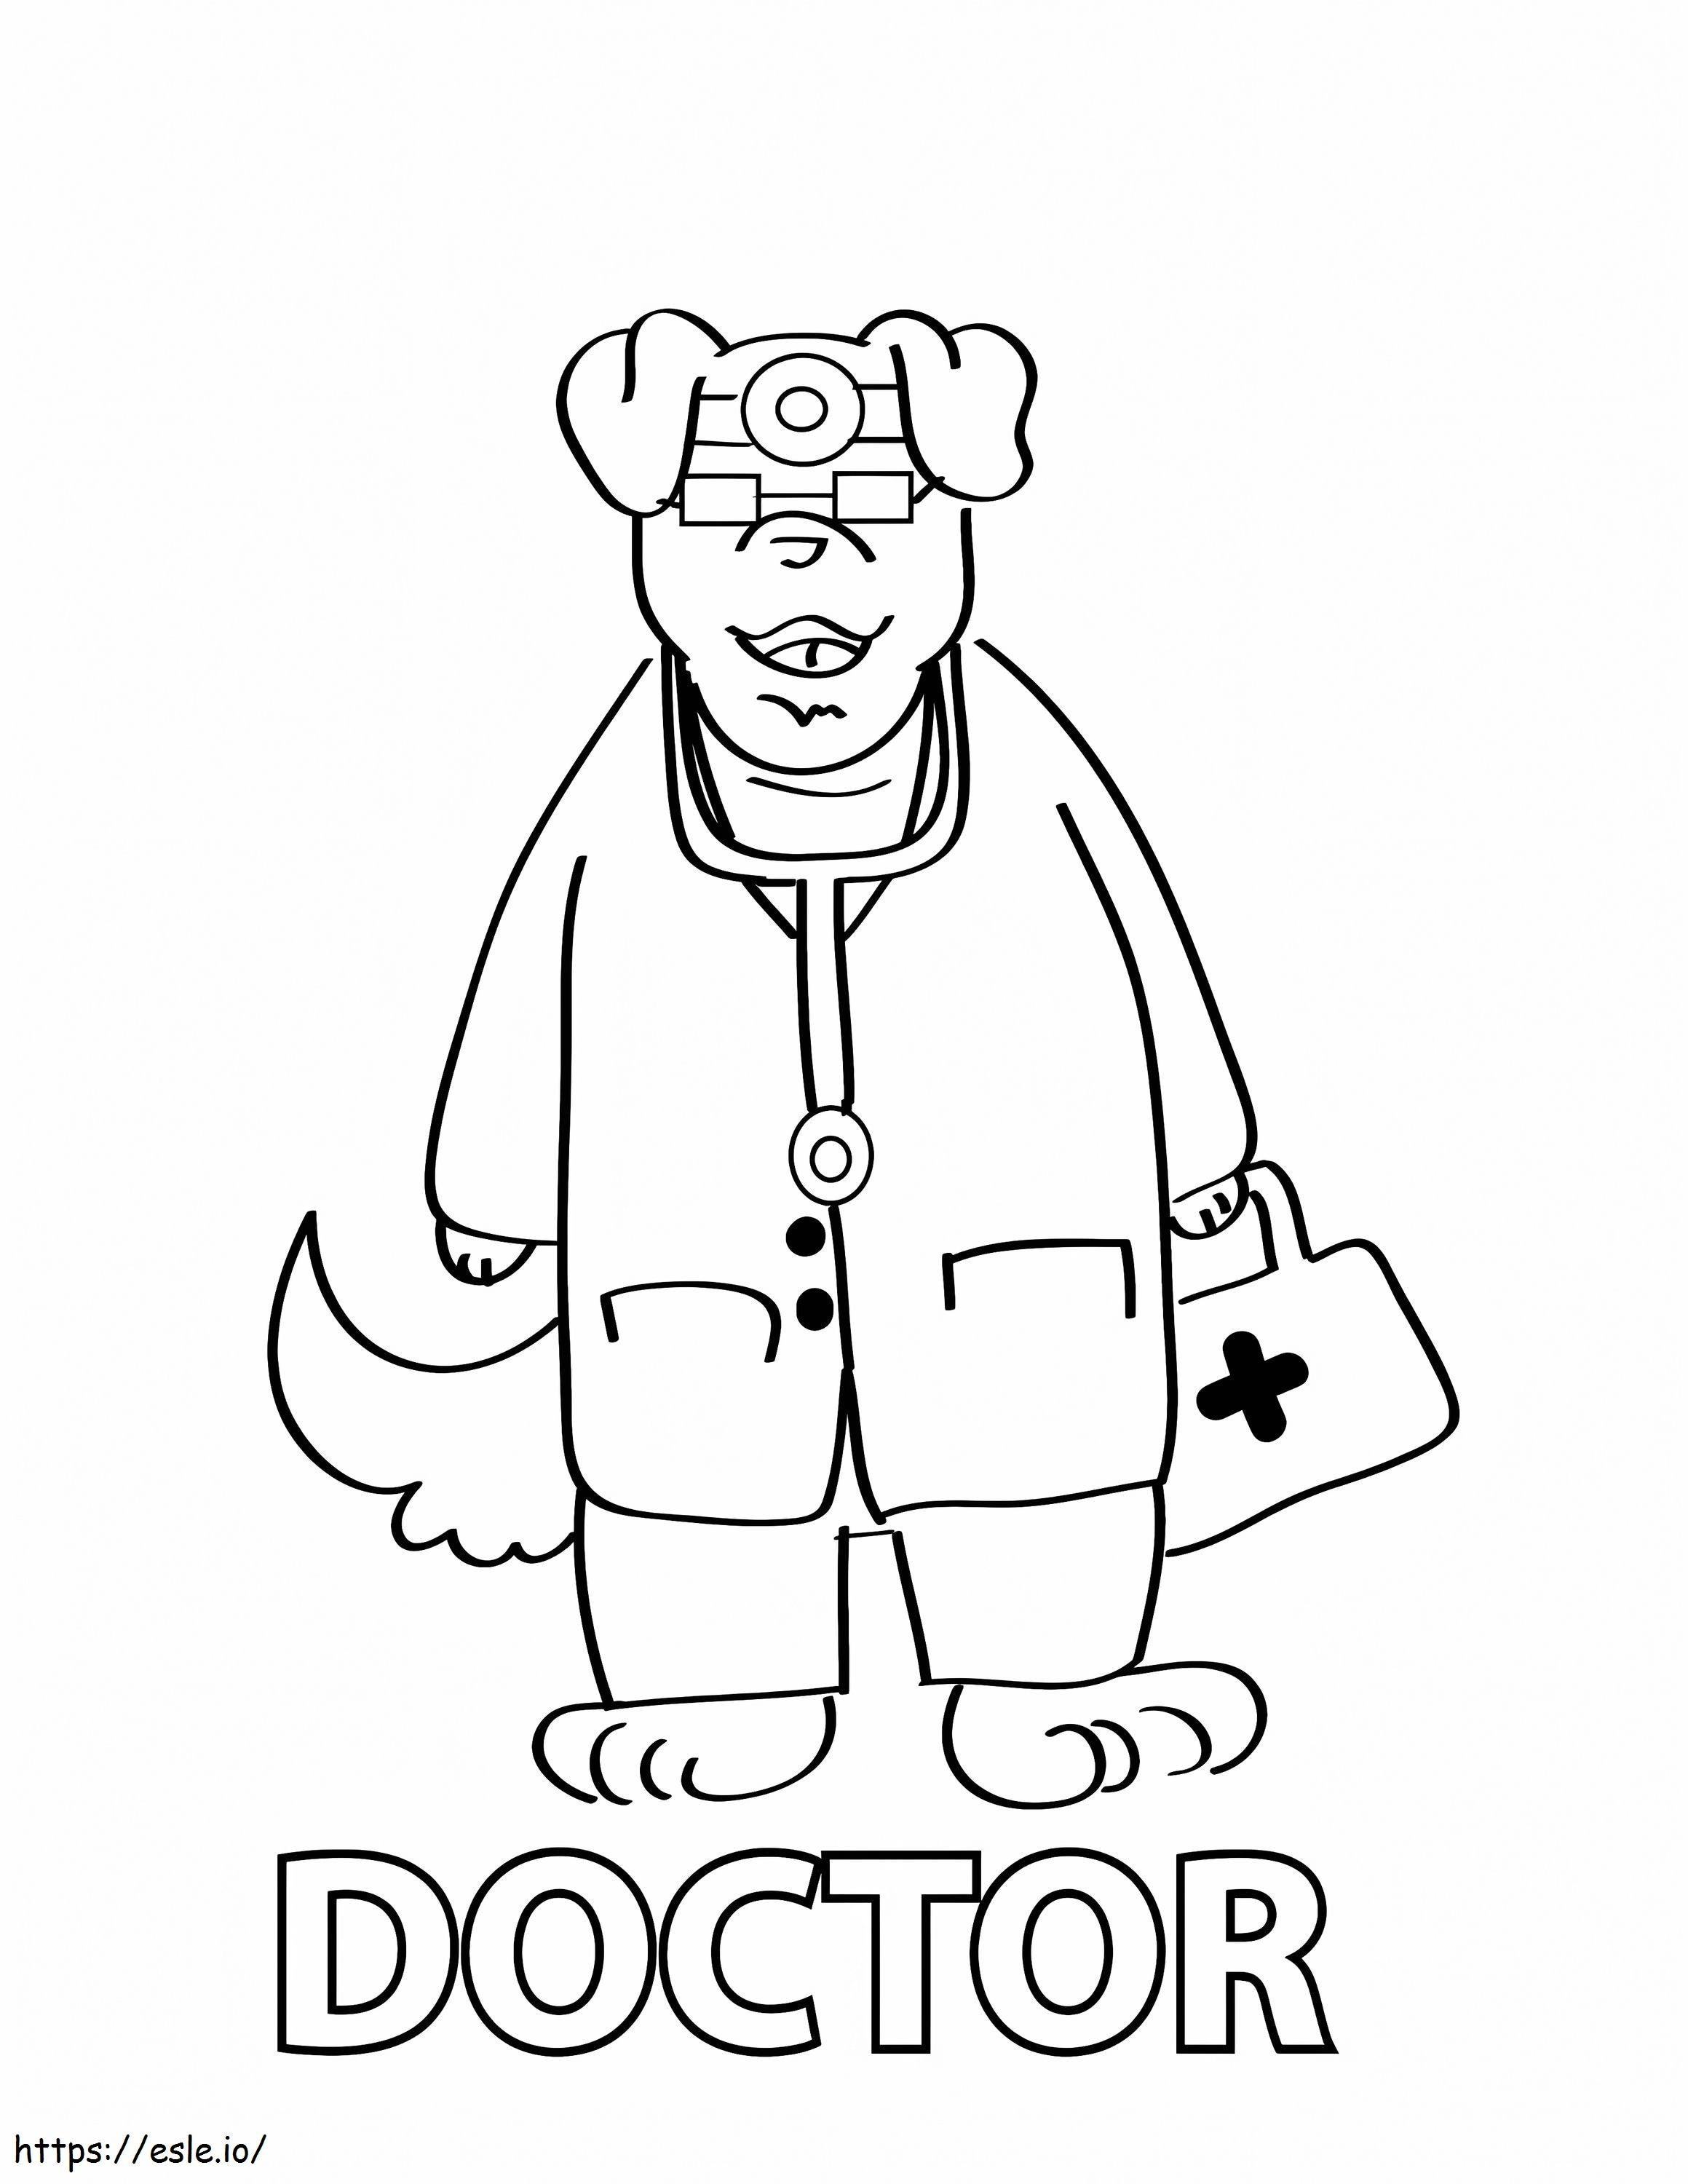 Cute Pig Doctor coloring page